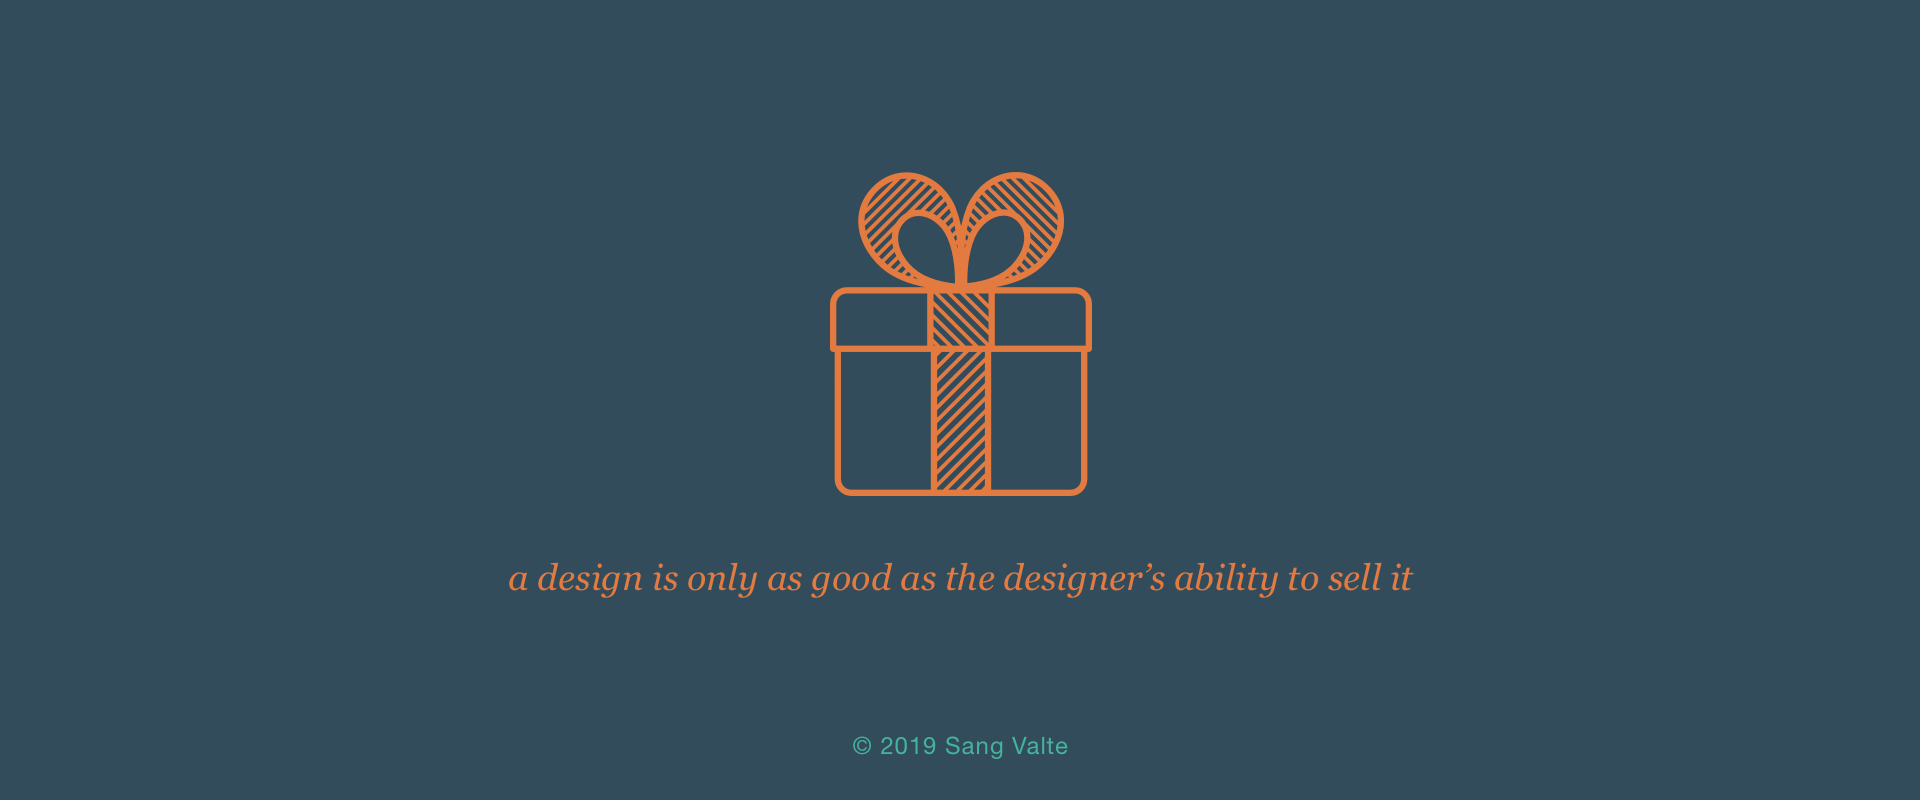 Your design is only as good as your ability to sell it